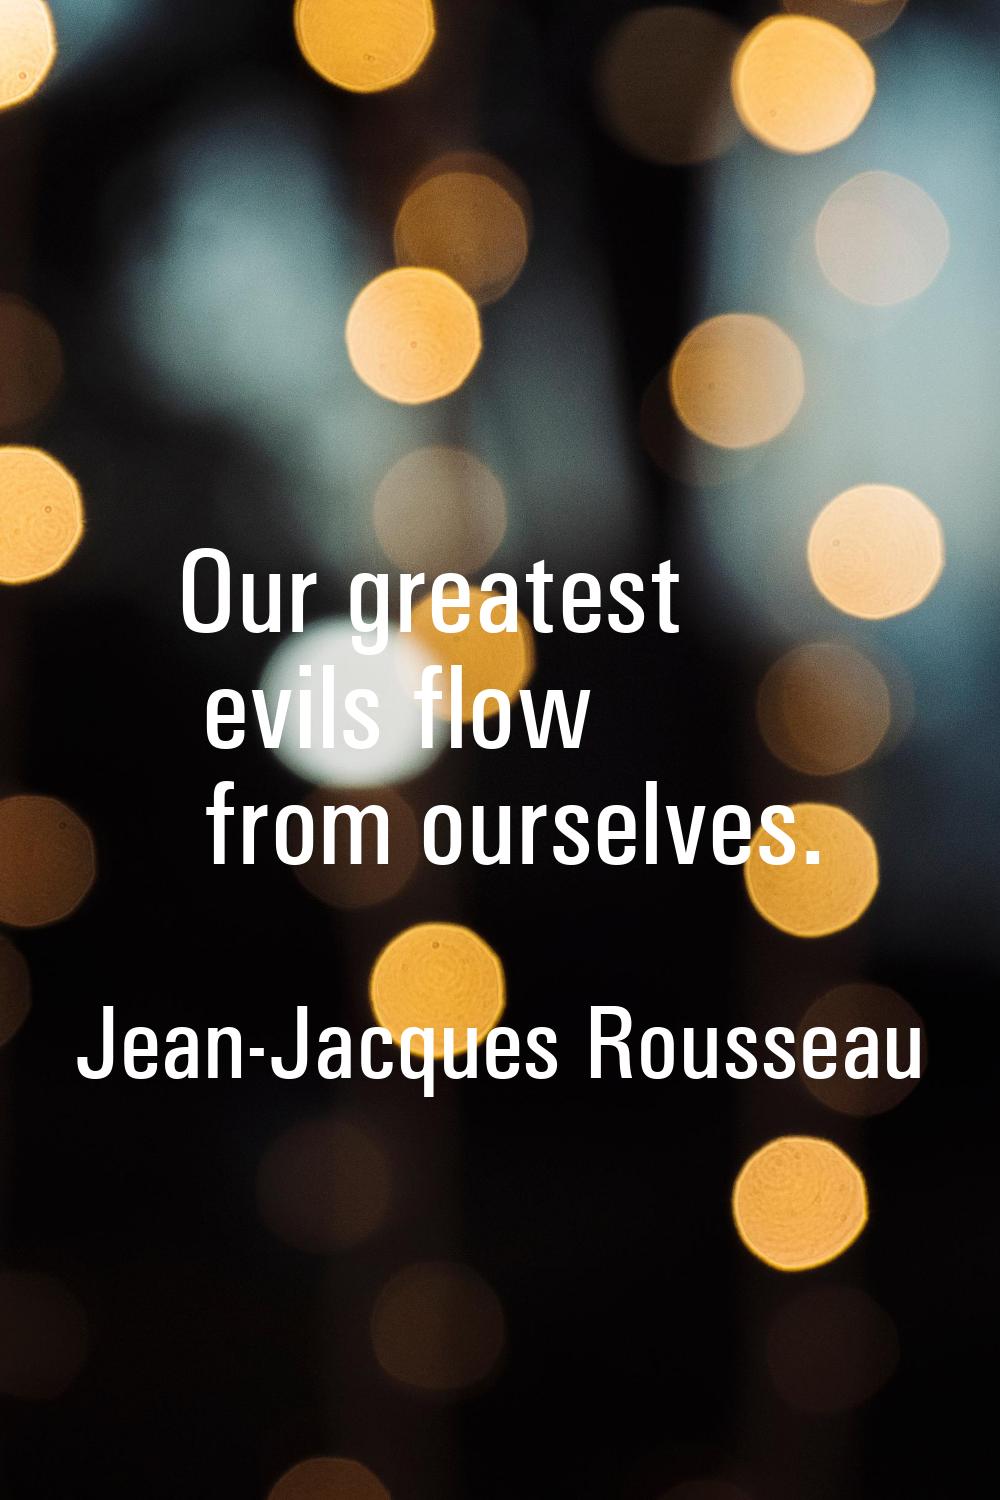 Our greatest evils flow from ourselves.